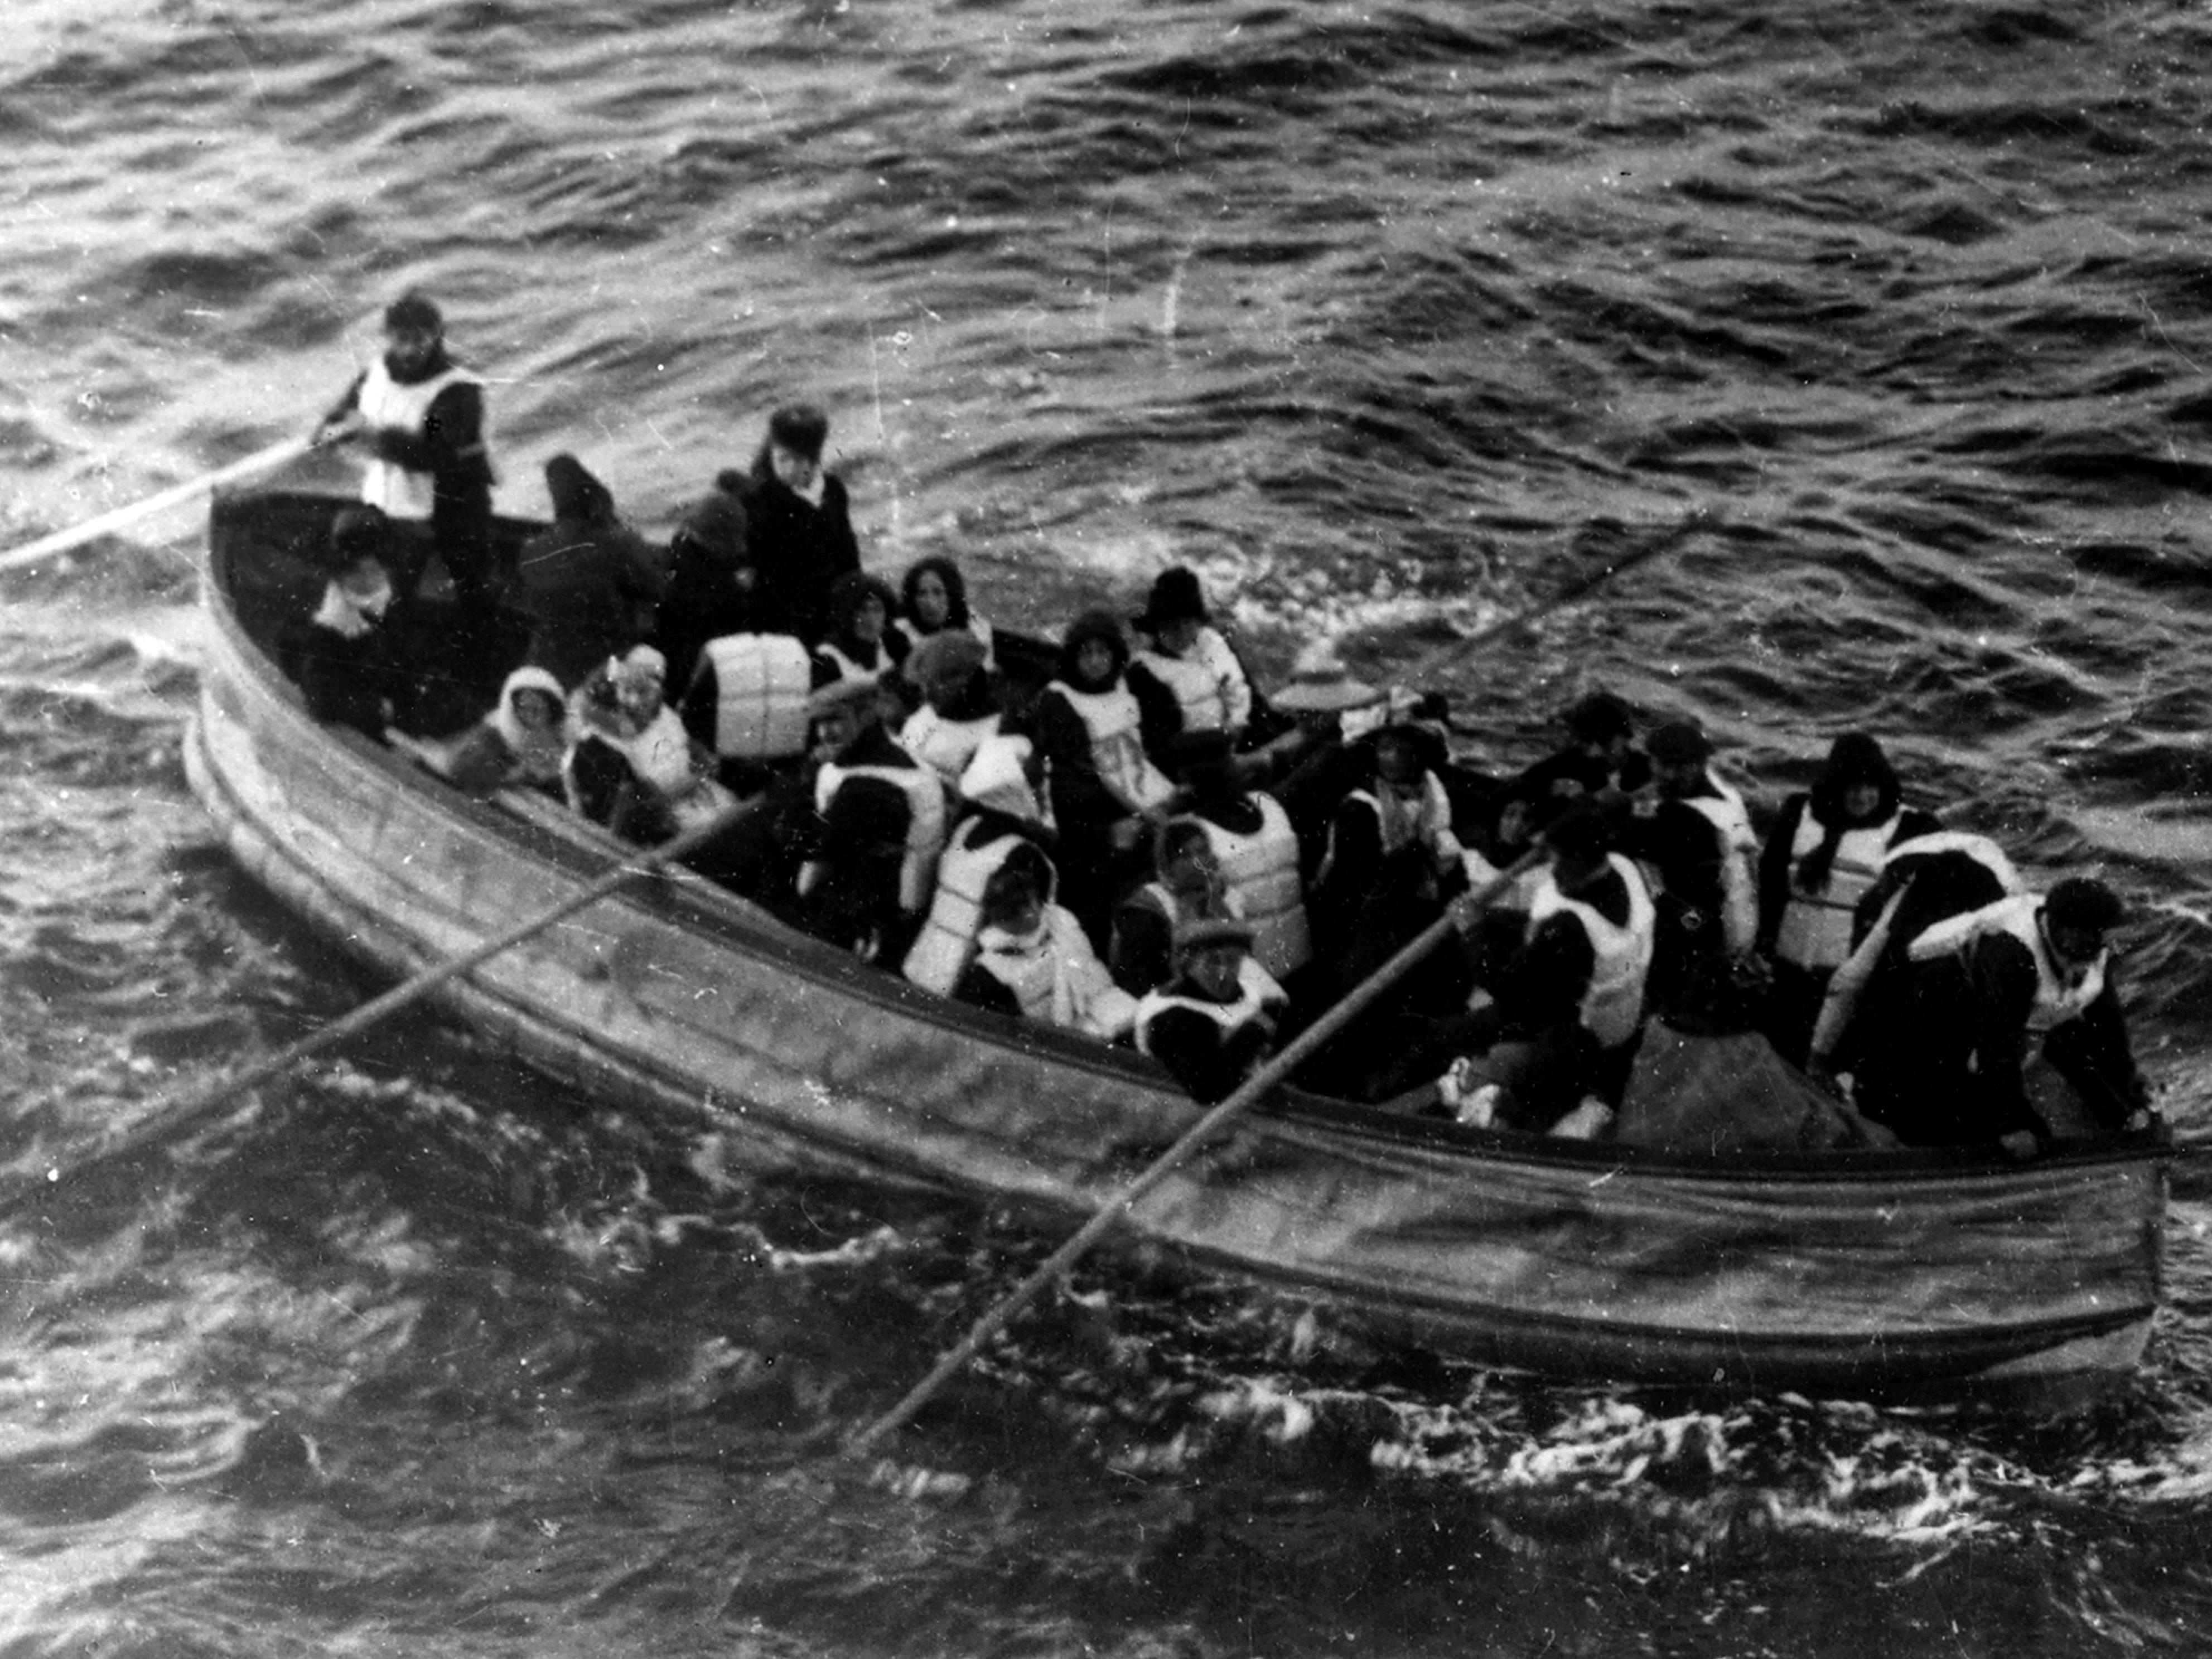 <p>As the ship began to take on water, the lifeboats were launched with women and children only. There were <a href="https://www.britannica.com/topic/Titanic">only 20 lifeboats aboard the Titanic</a>, which could carry up to 1,178 people — only half of the ship's passengers and crew.</p><p> These boats were launched below capacity, for fear that the device lowering the boats would break if the boats were full. For instance, the first lifeboat to leave Titanic had the capacity for 65 people, but held only 25 when it launched. </p><p>After the ship sank, people in lifeboats returned to search for survivors. Instead, they found most people frozen to death in the icy waters.</p>